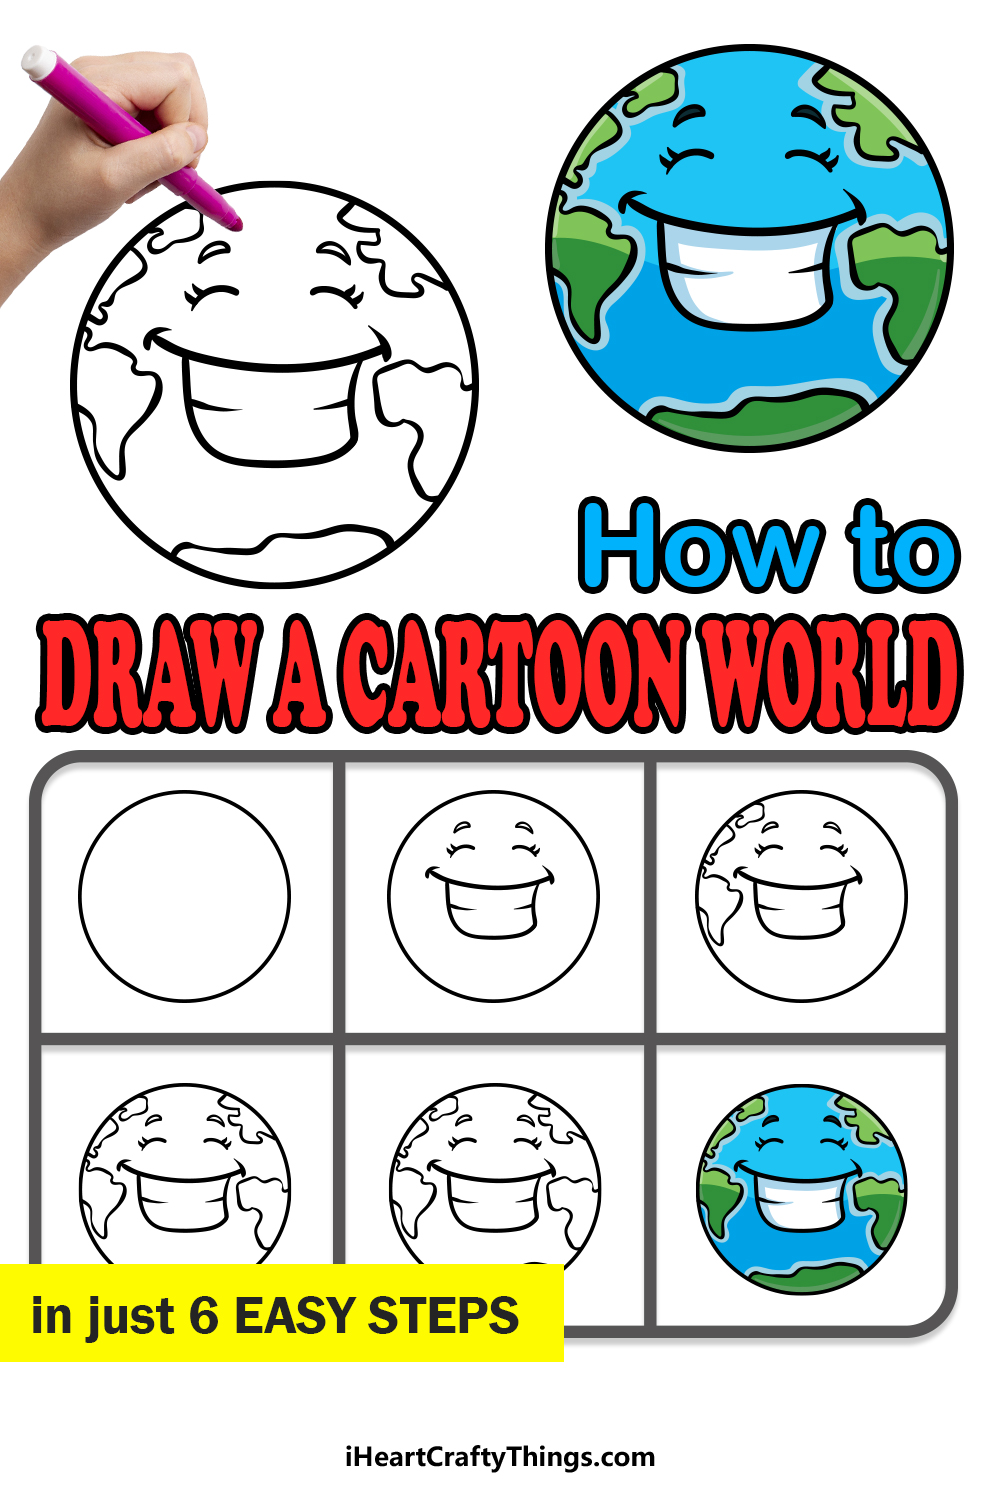 how to draw a cartoon world in 6 easy steps